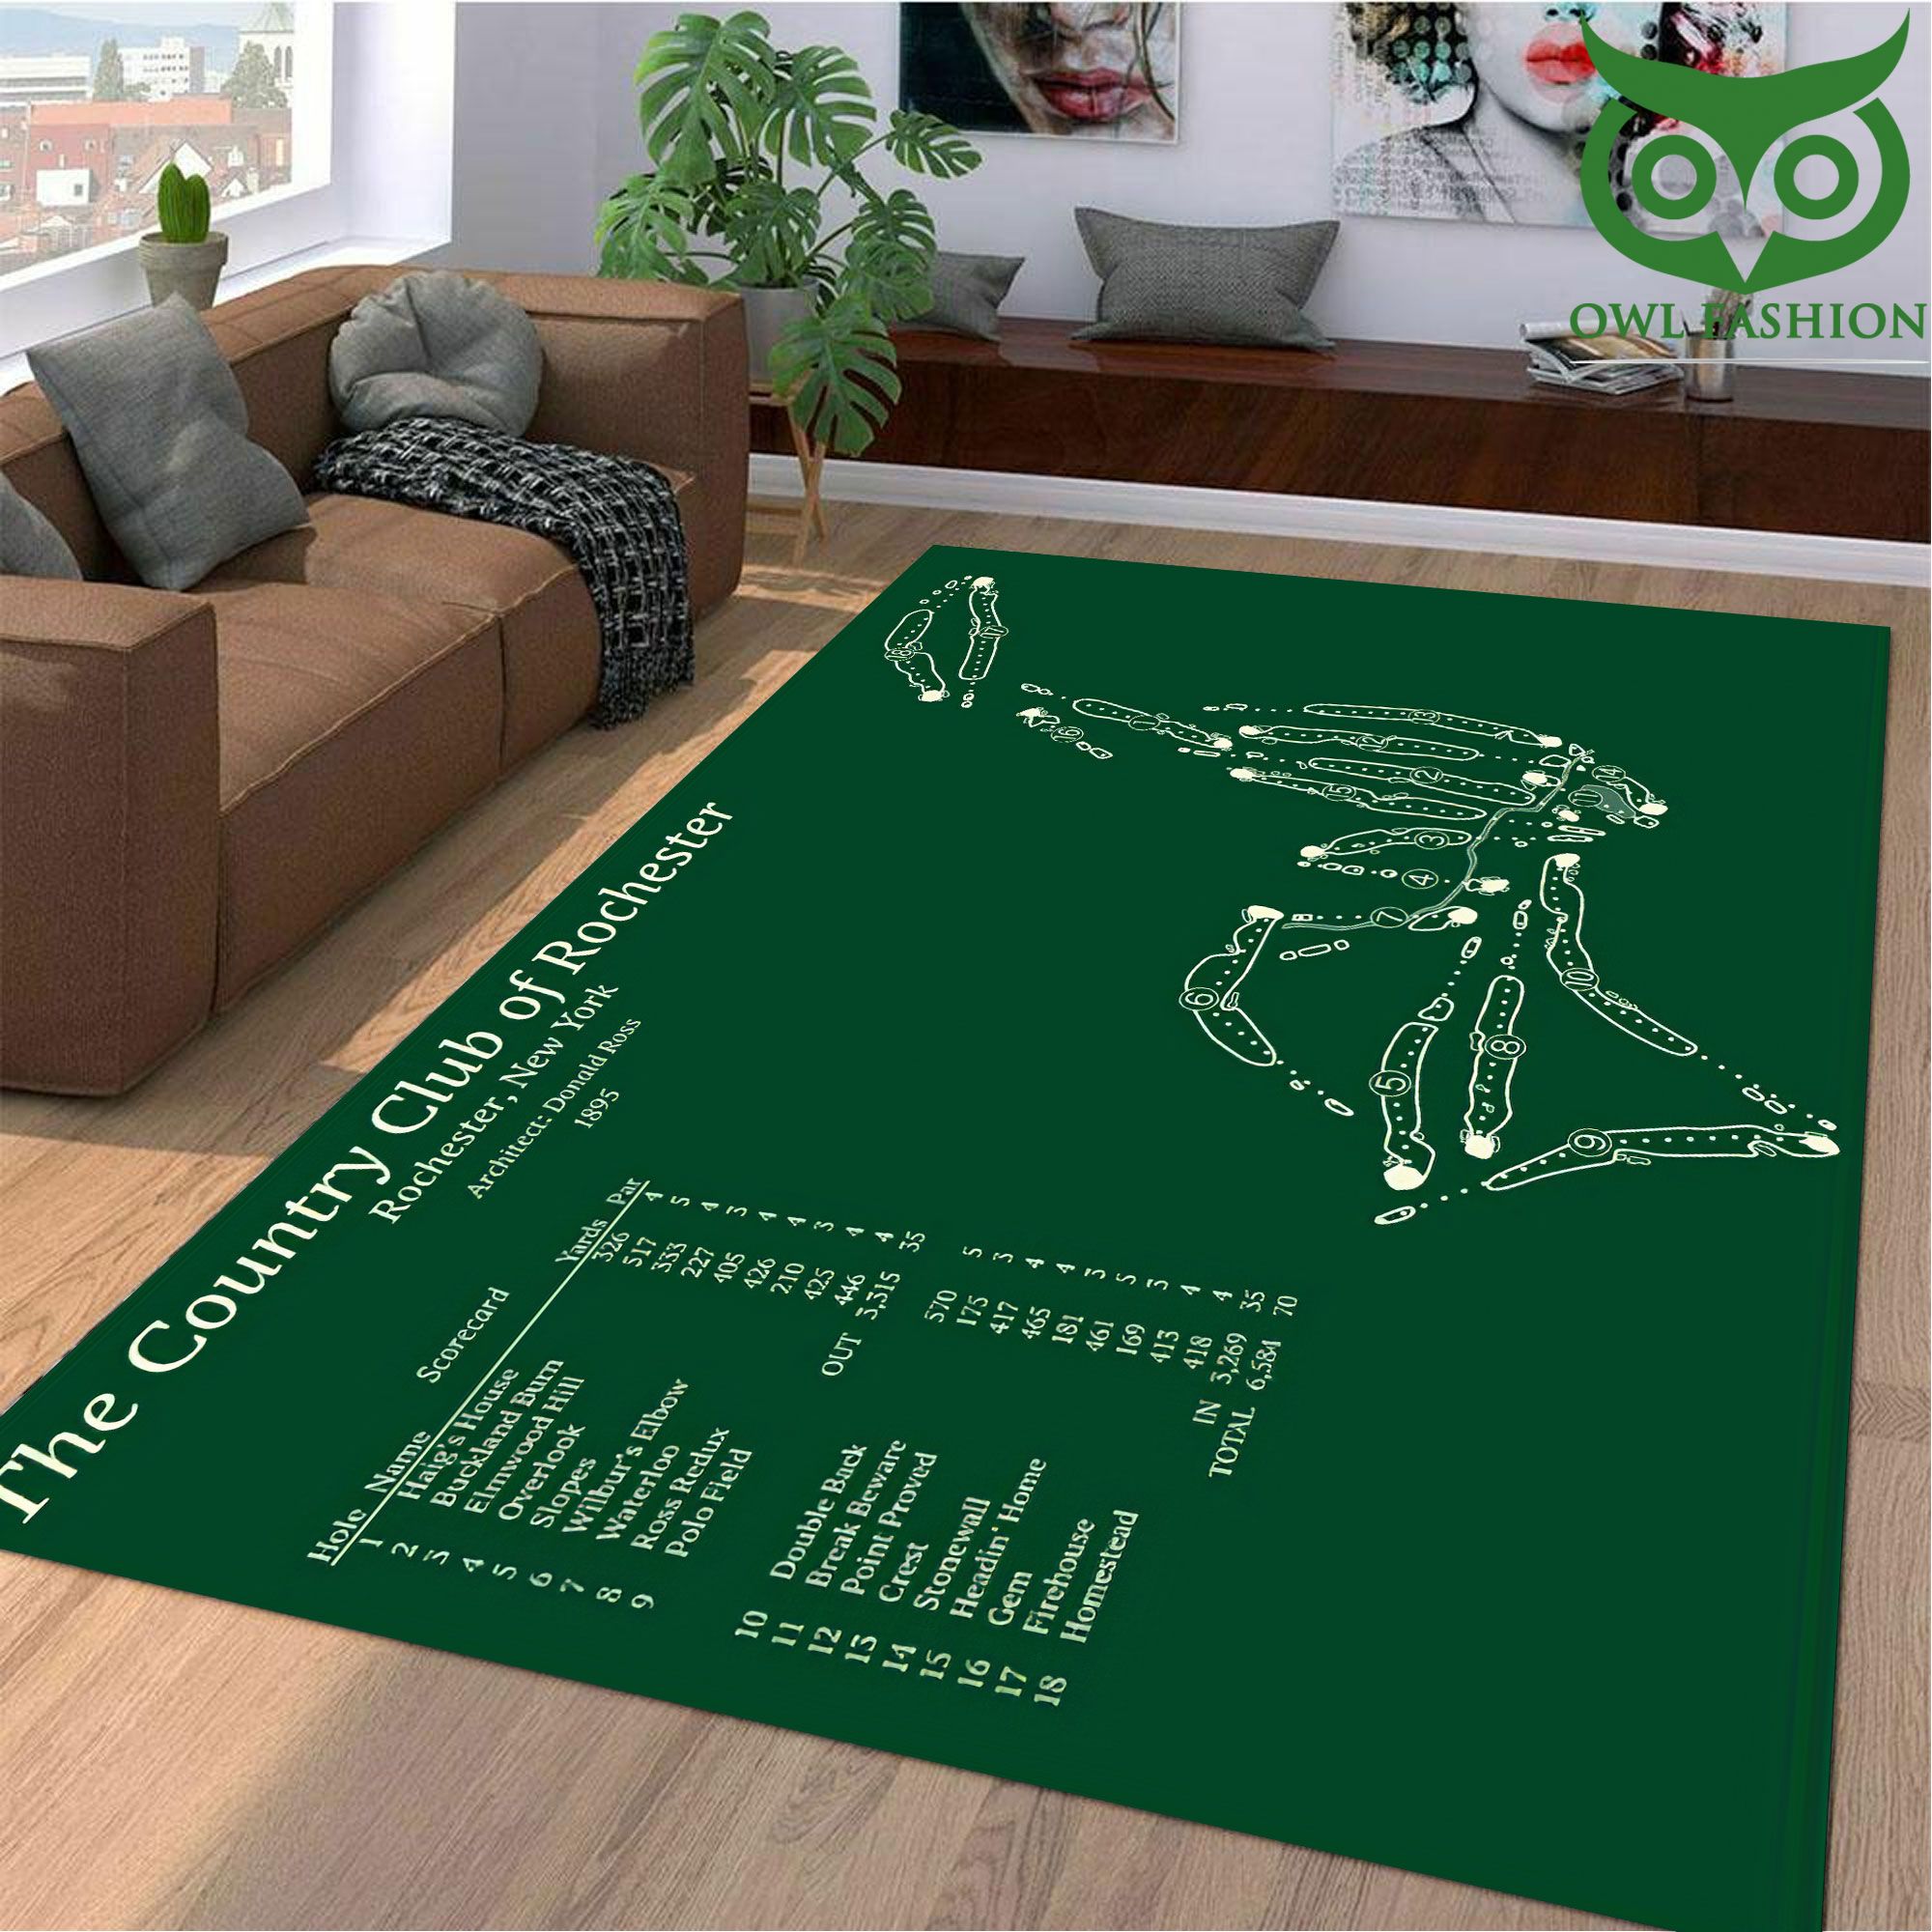 26 The country club of rochester Golf Course Map Carpet Rug